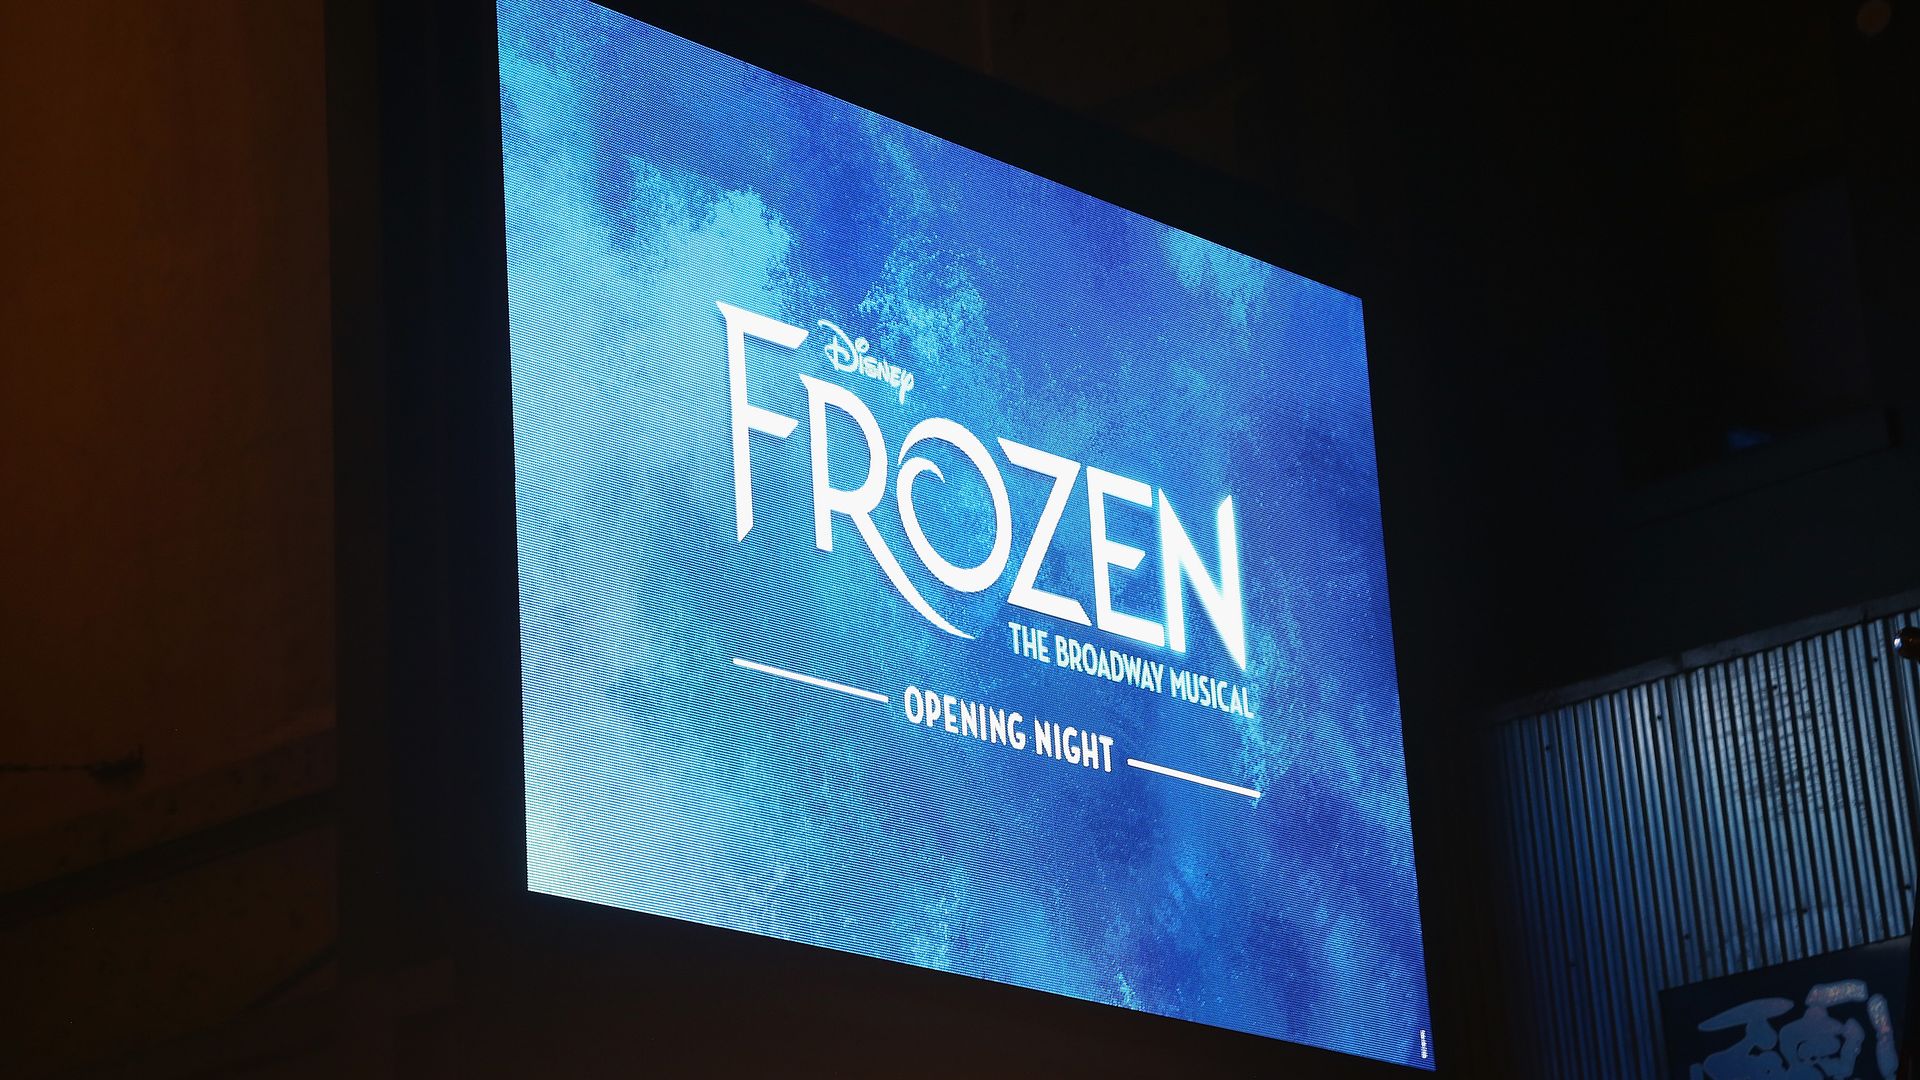 Signage at the opening night of Disney's new hit musical "Frozen" on Broadway